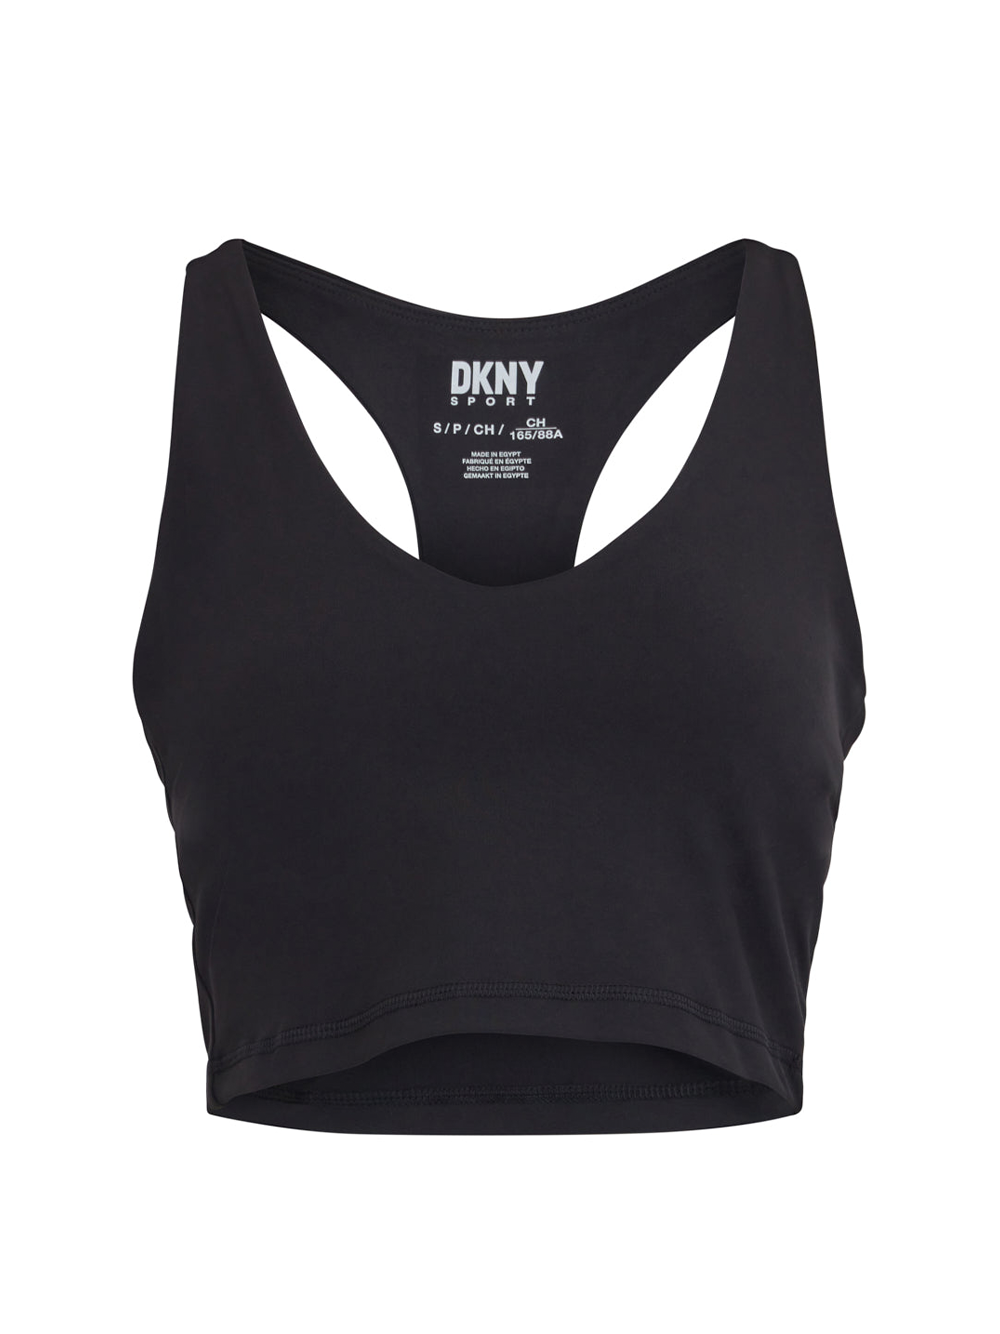 DKNY Spandex Athletic Tank Tops for Women